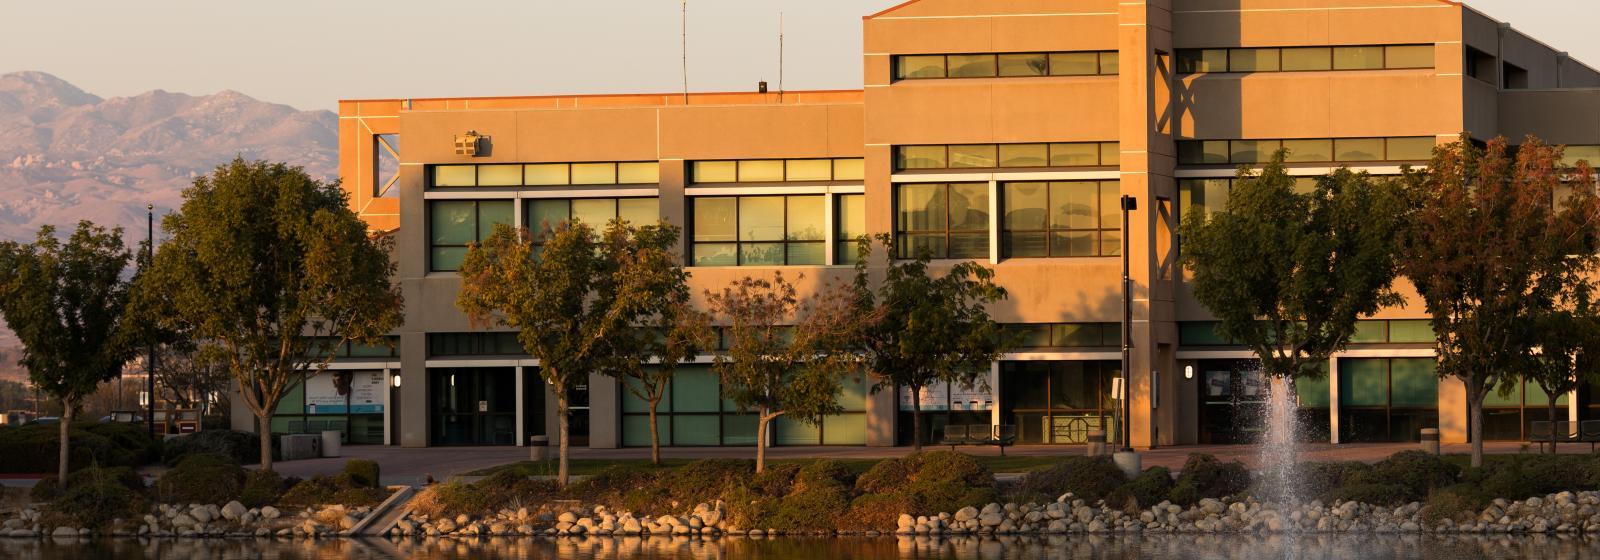 Campus view of lake and building